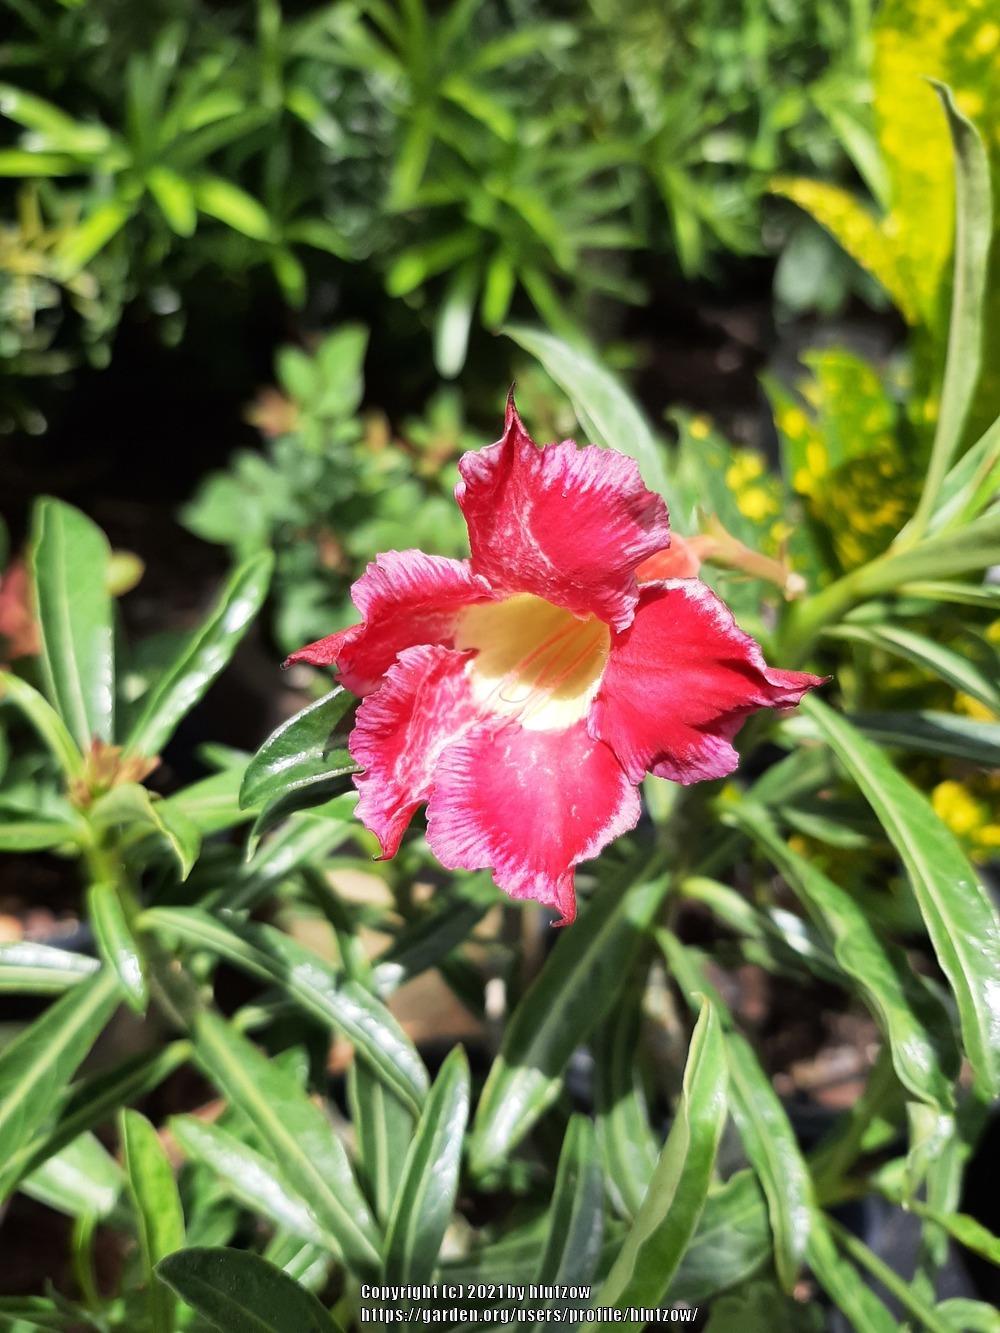 Photo of Adeniums (Adenium) uploaded by hlutzow